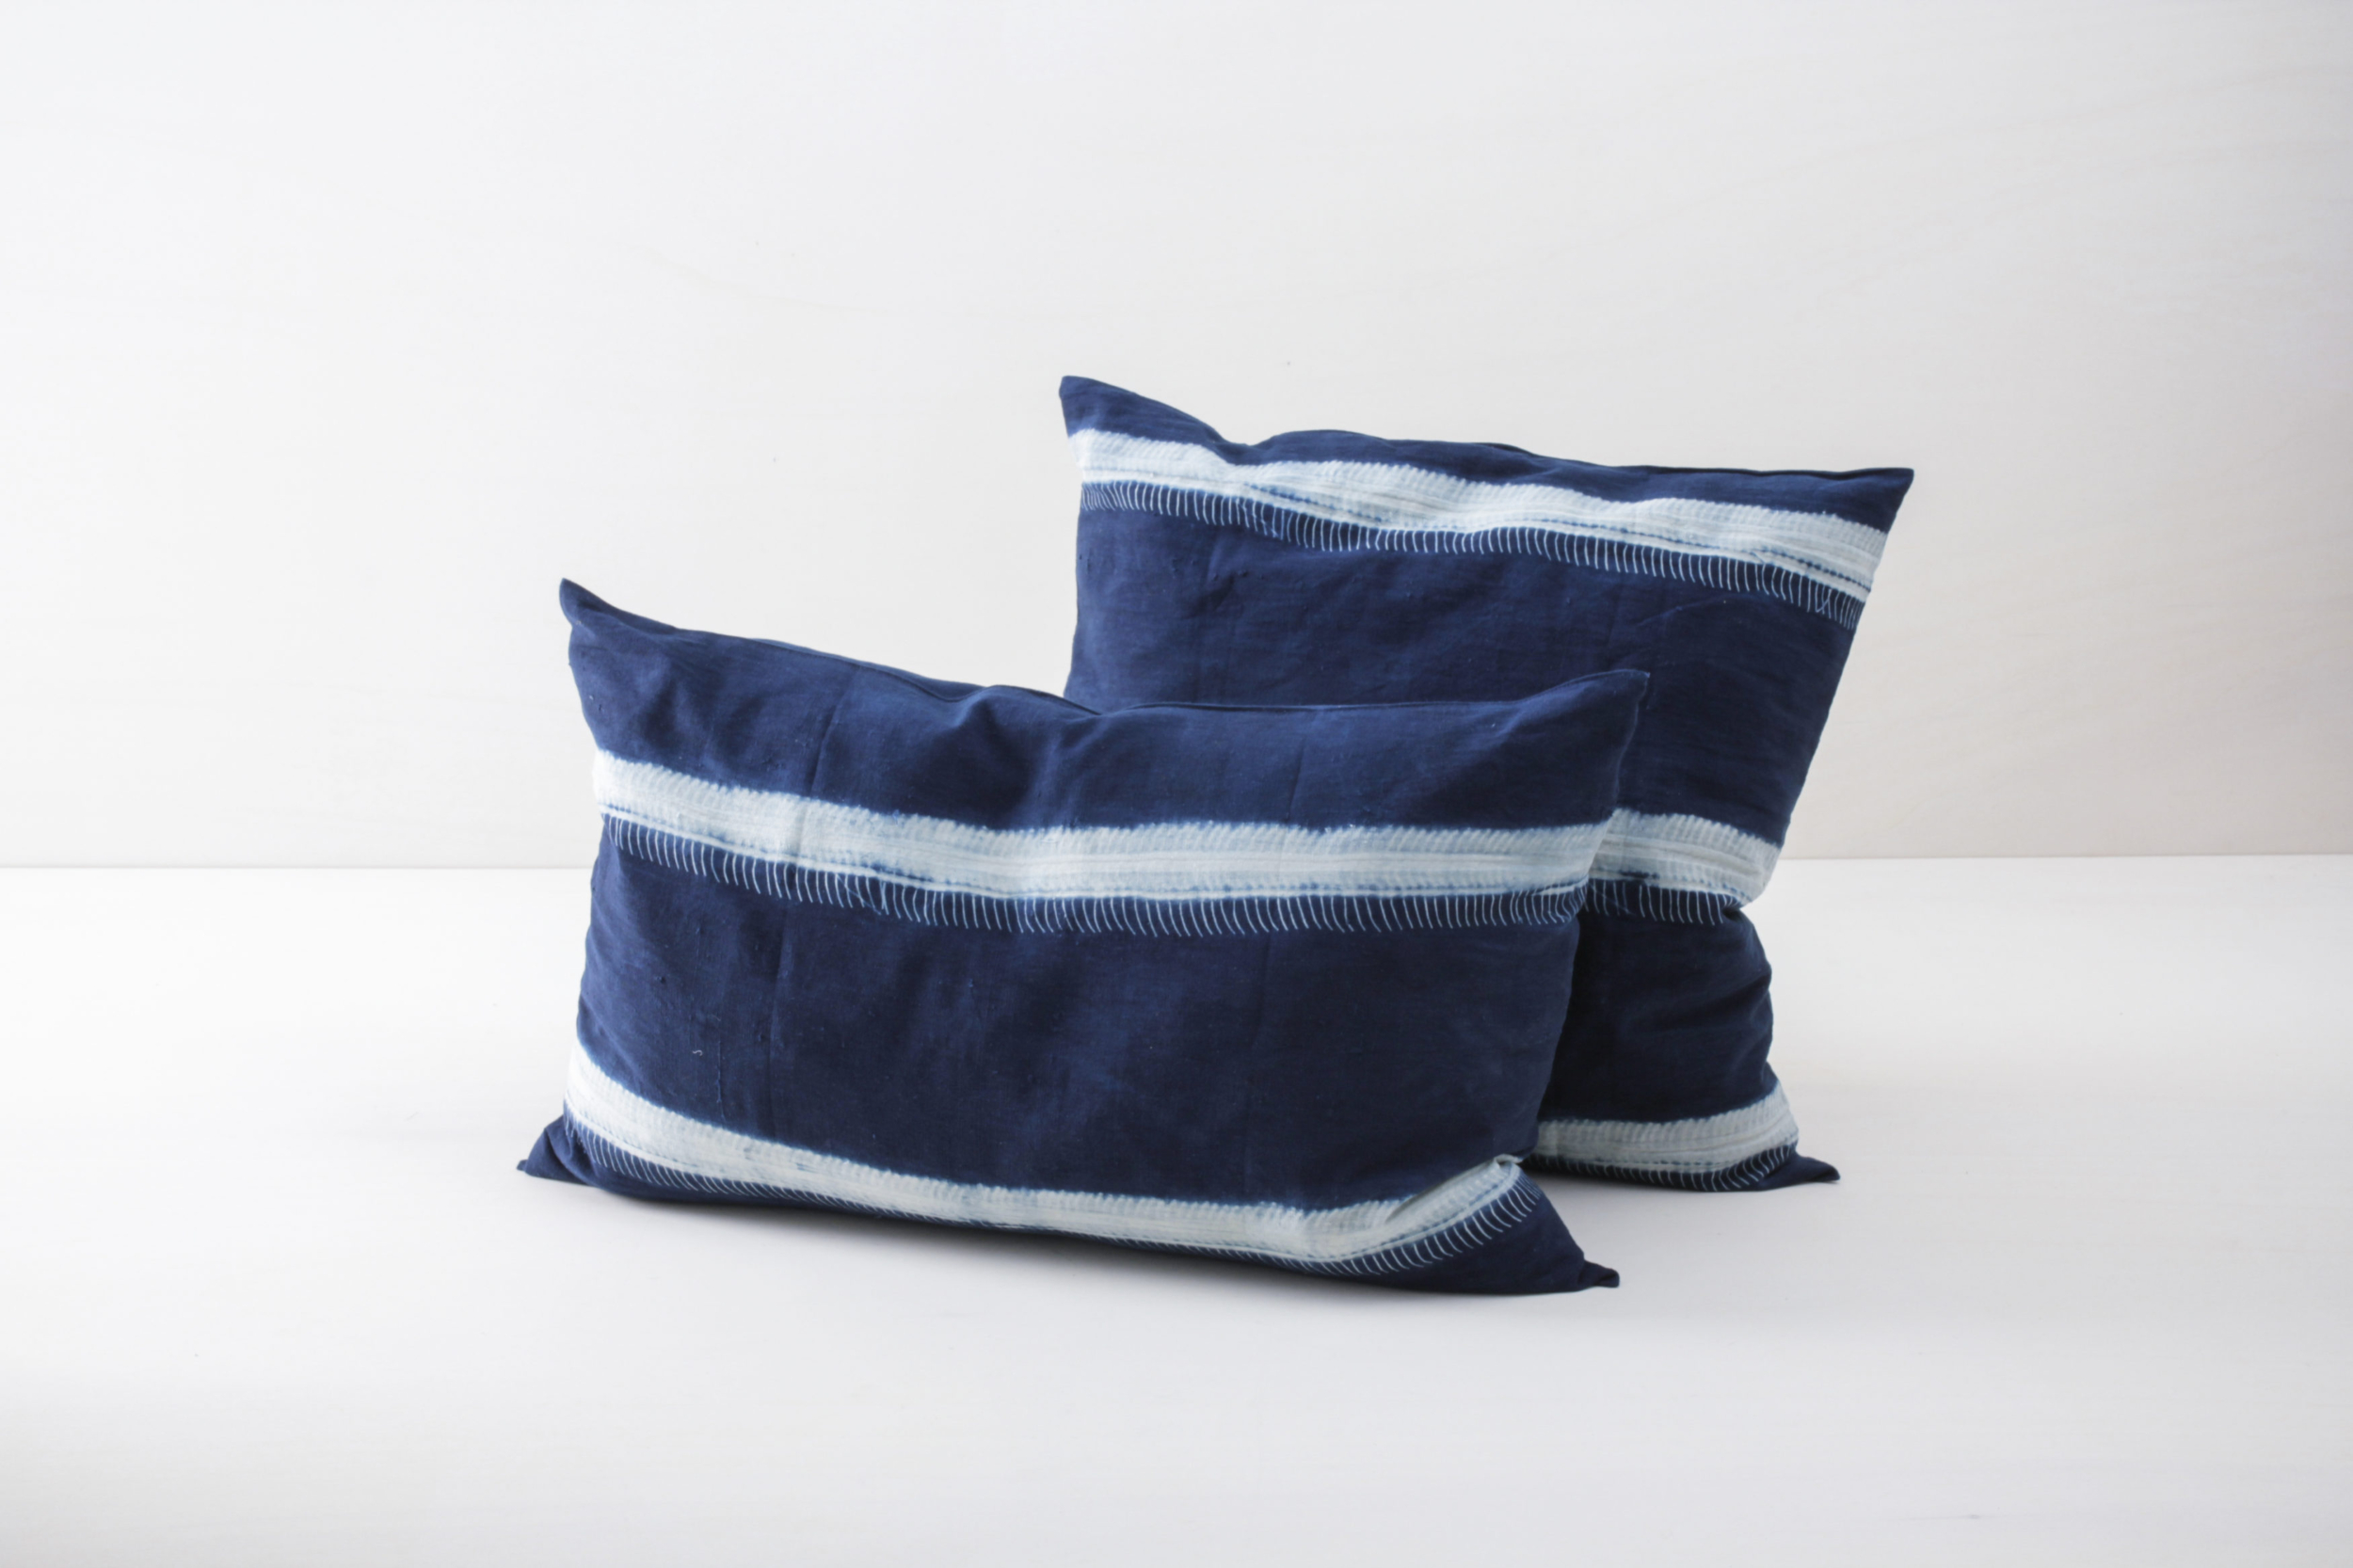  | The Walter cotton pillows are from Guinea. The pillows are hand woven, hand dyed in indigo blue and rectangular. The Indigo pillows are perfect for decorating lounge, picnic and garden parties.We also rent out other pillows, blankets and mattresses to match the Walter pillows. | 